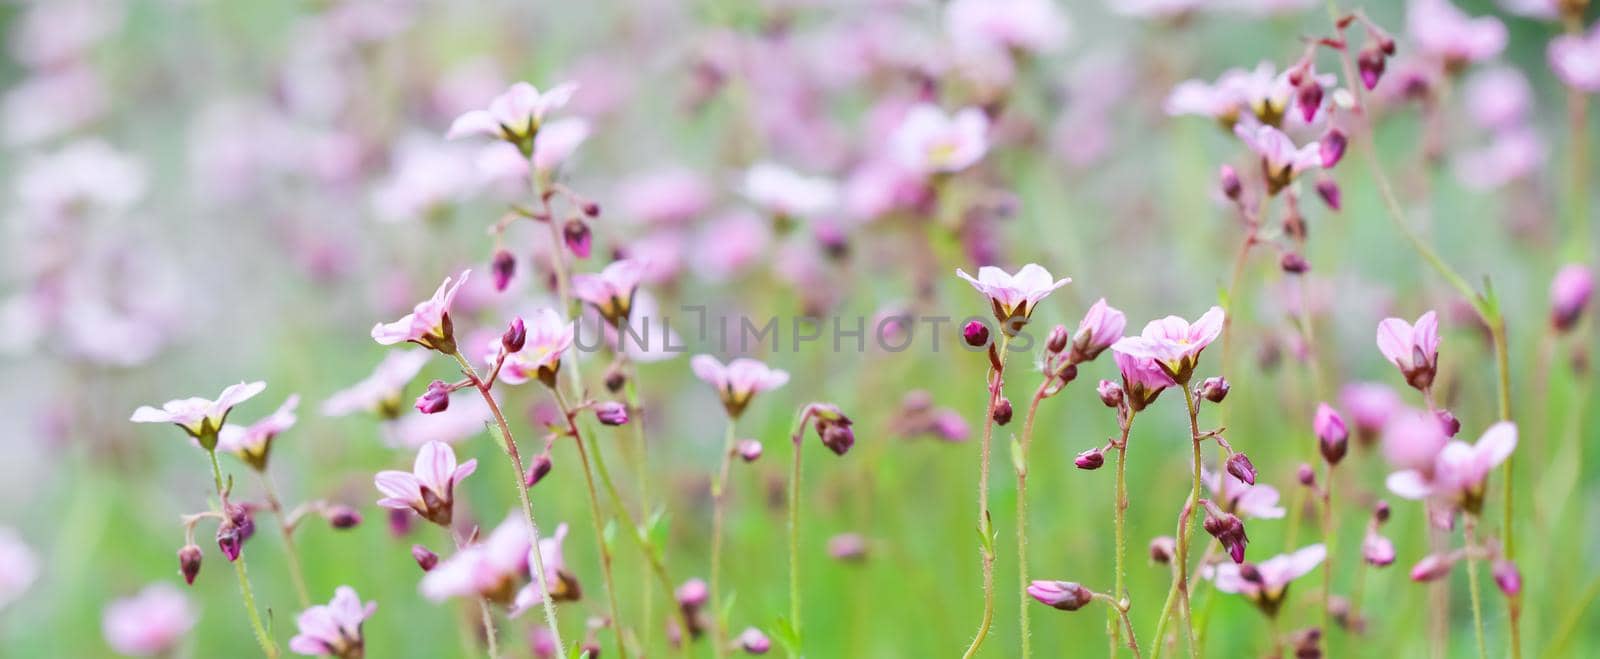 Delicate white pink flowers of Saxifrage moss in spring garden by Olayola